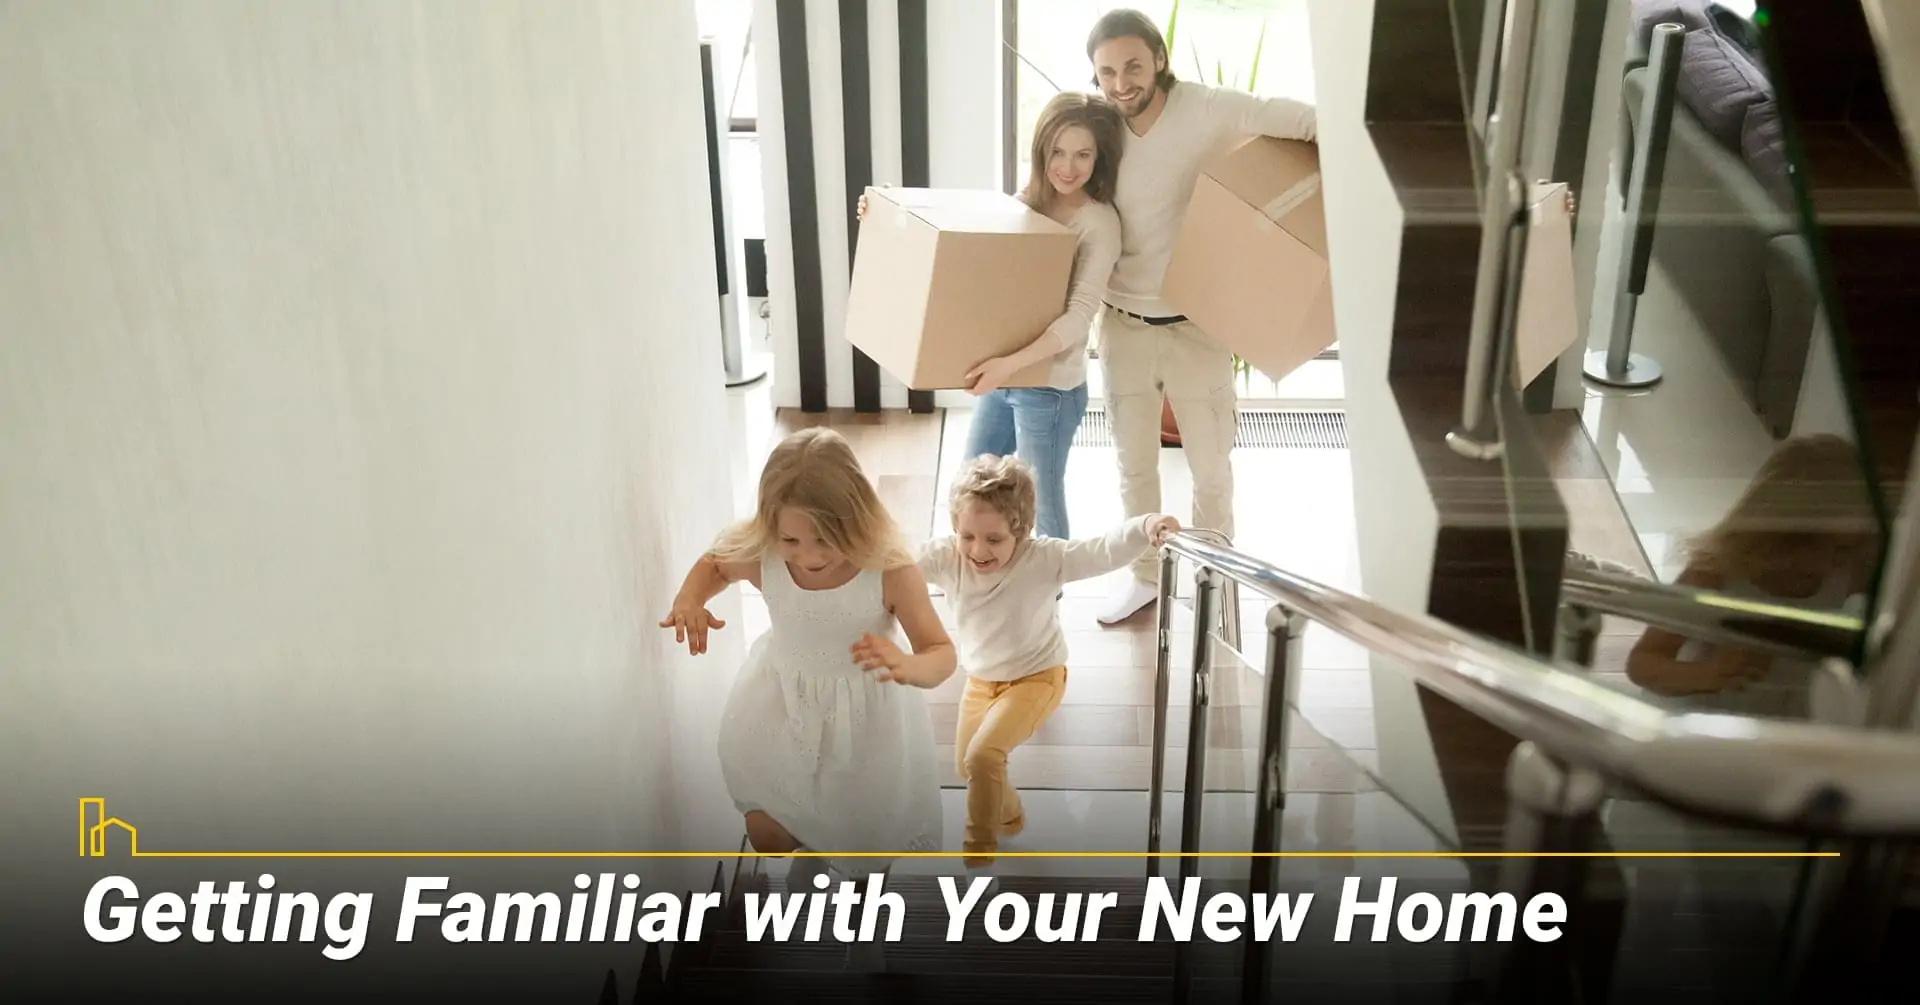 Getting Familiar with Your New Home, take a closer look at your new home